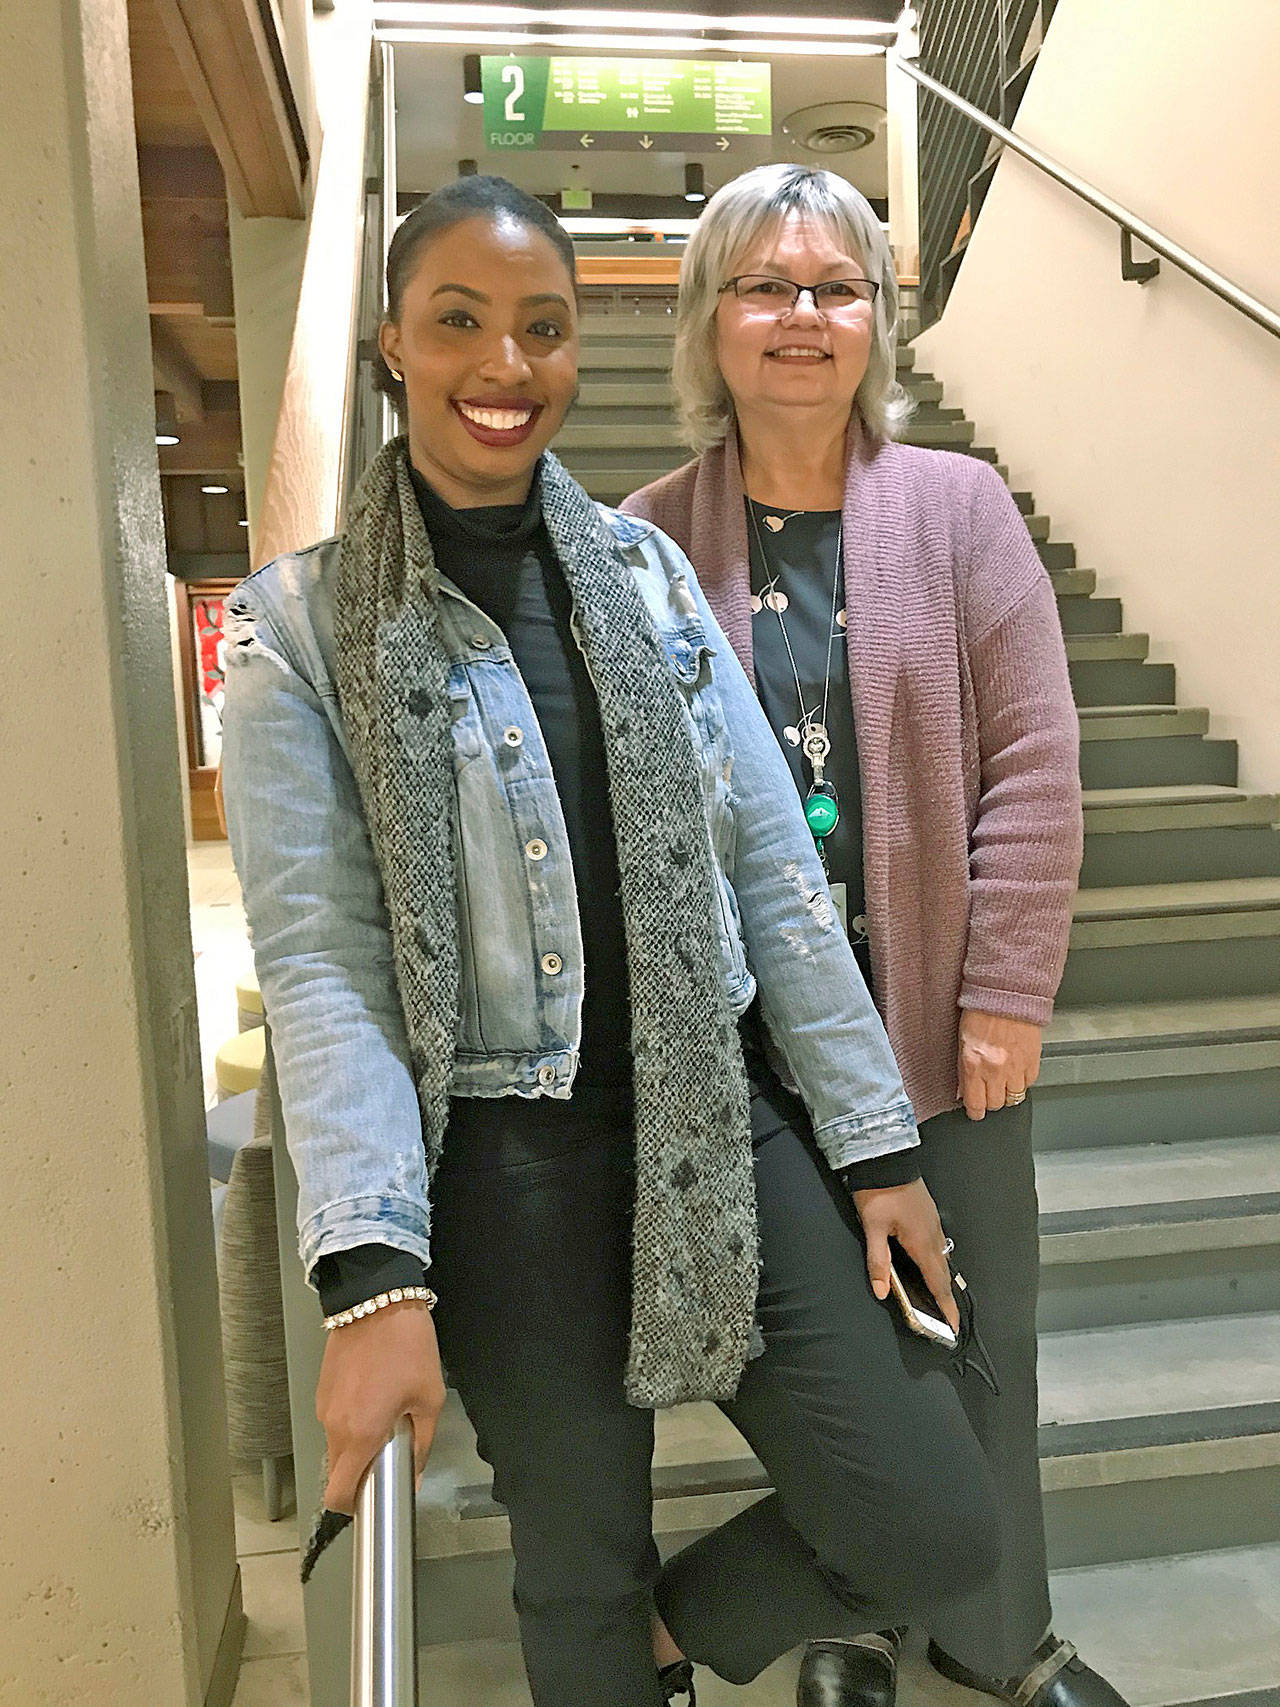 Basha Alexander, progress and completion advisor in the Career & Advising Center at Green River College, left, and Diana Holz, director of early childhood education at the school, are helping student-parents navigate their education with helpful resources. MARK KLAAS, Kent Reporter